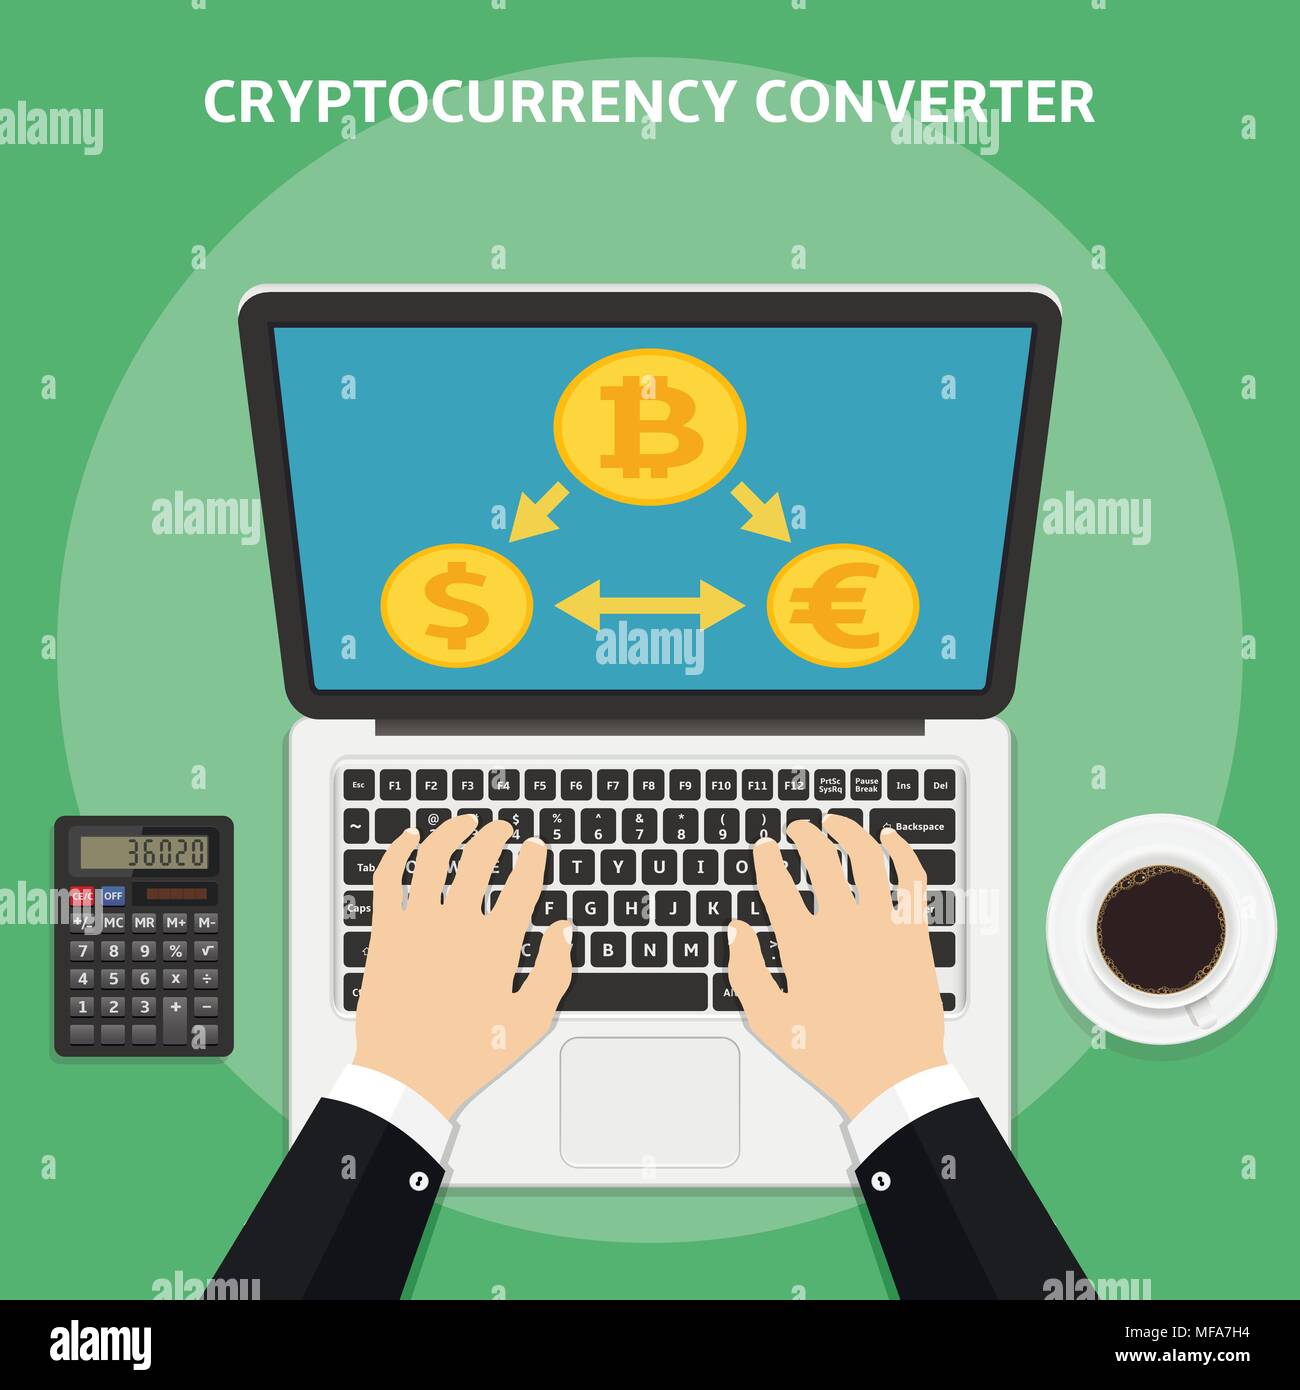 Crypto Price Calculator And Converter - Cryptocurrency ...